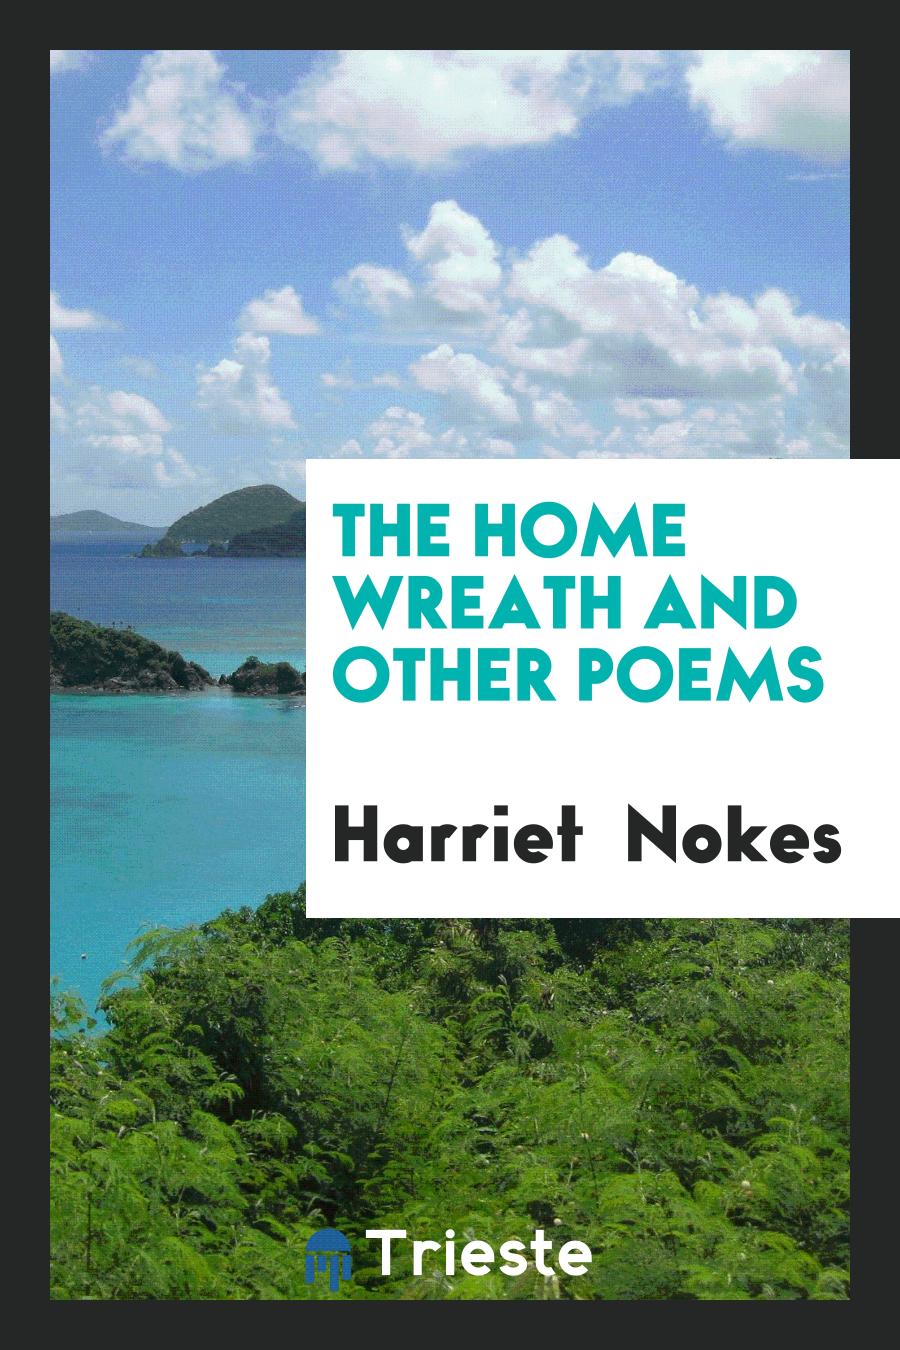 The Home Wreath and Other Poems